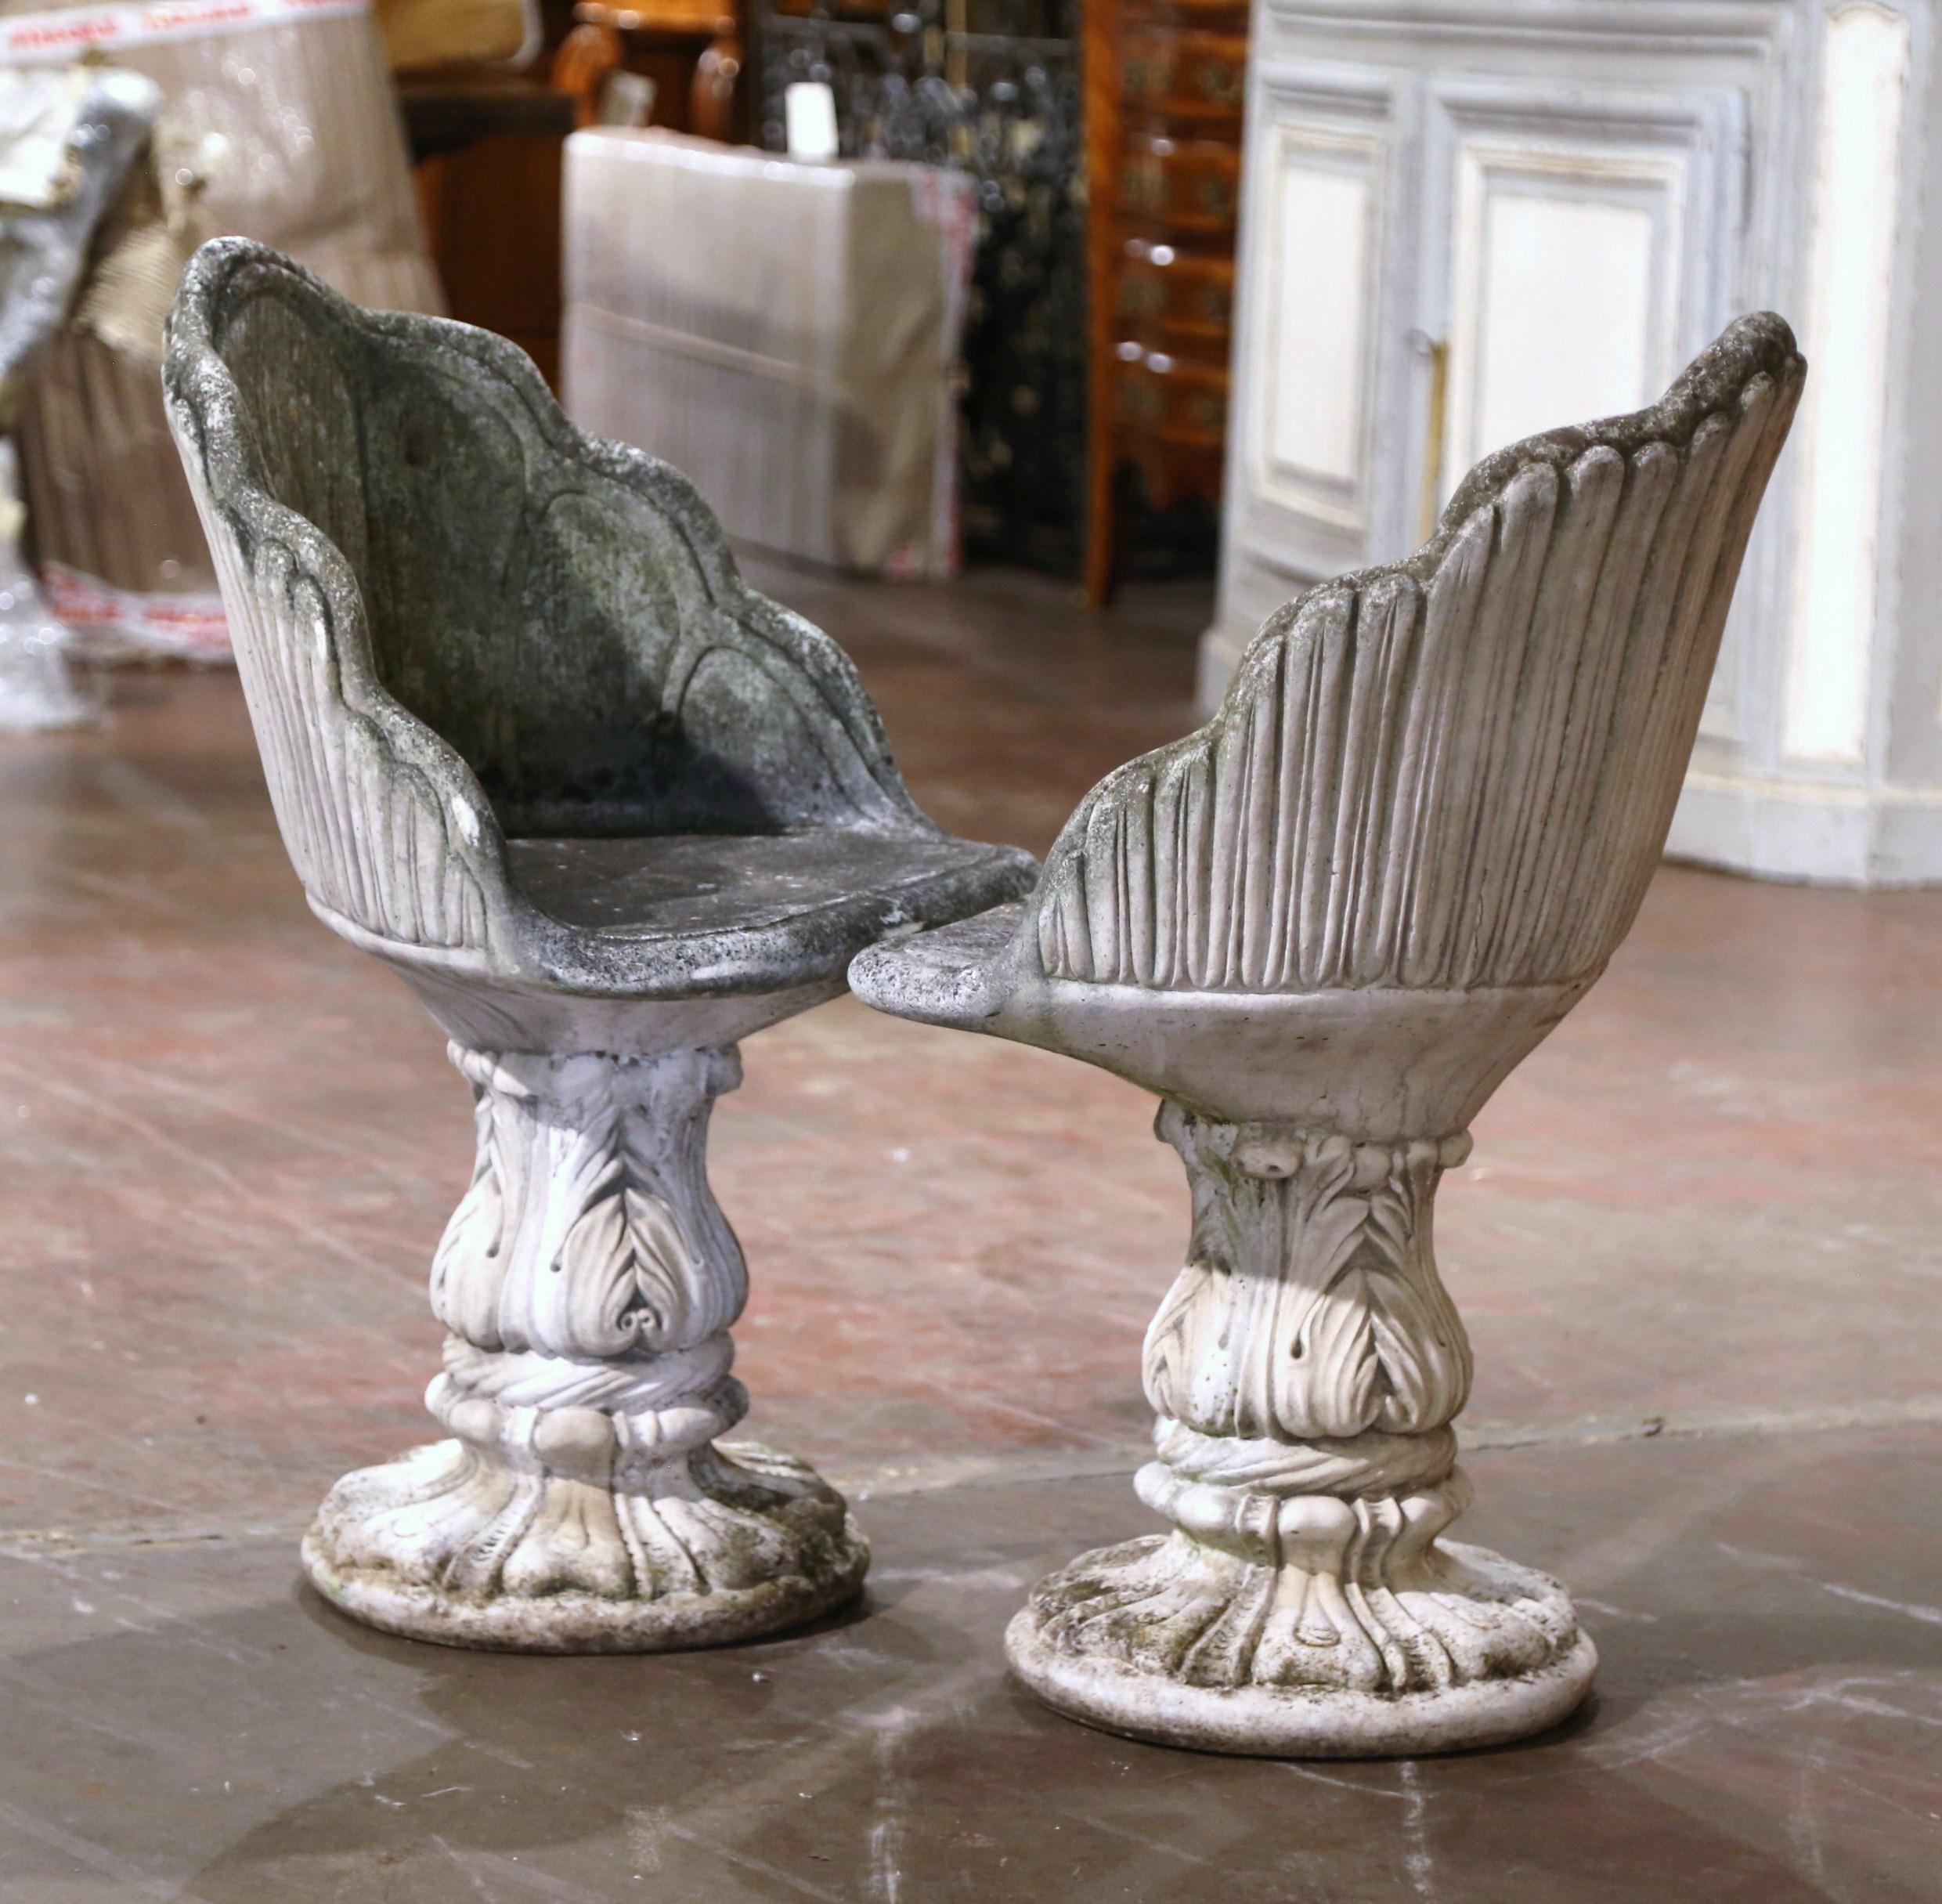 Pair of Mid Century Carved Stone Garden Chairs with Seashell Motifs For Sale 1